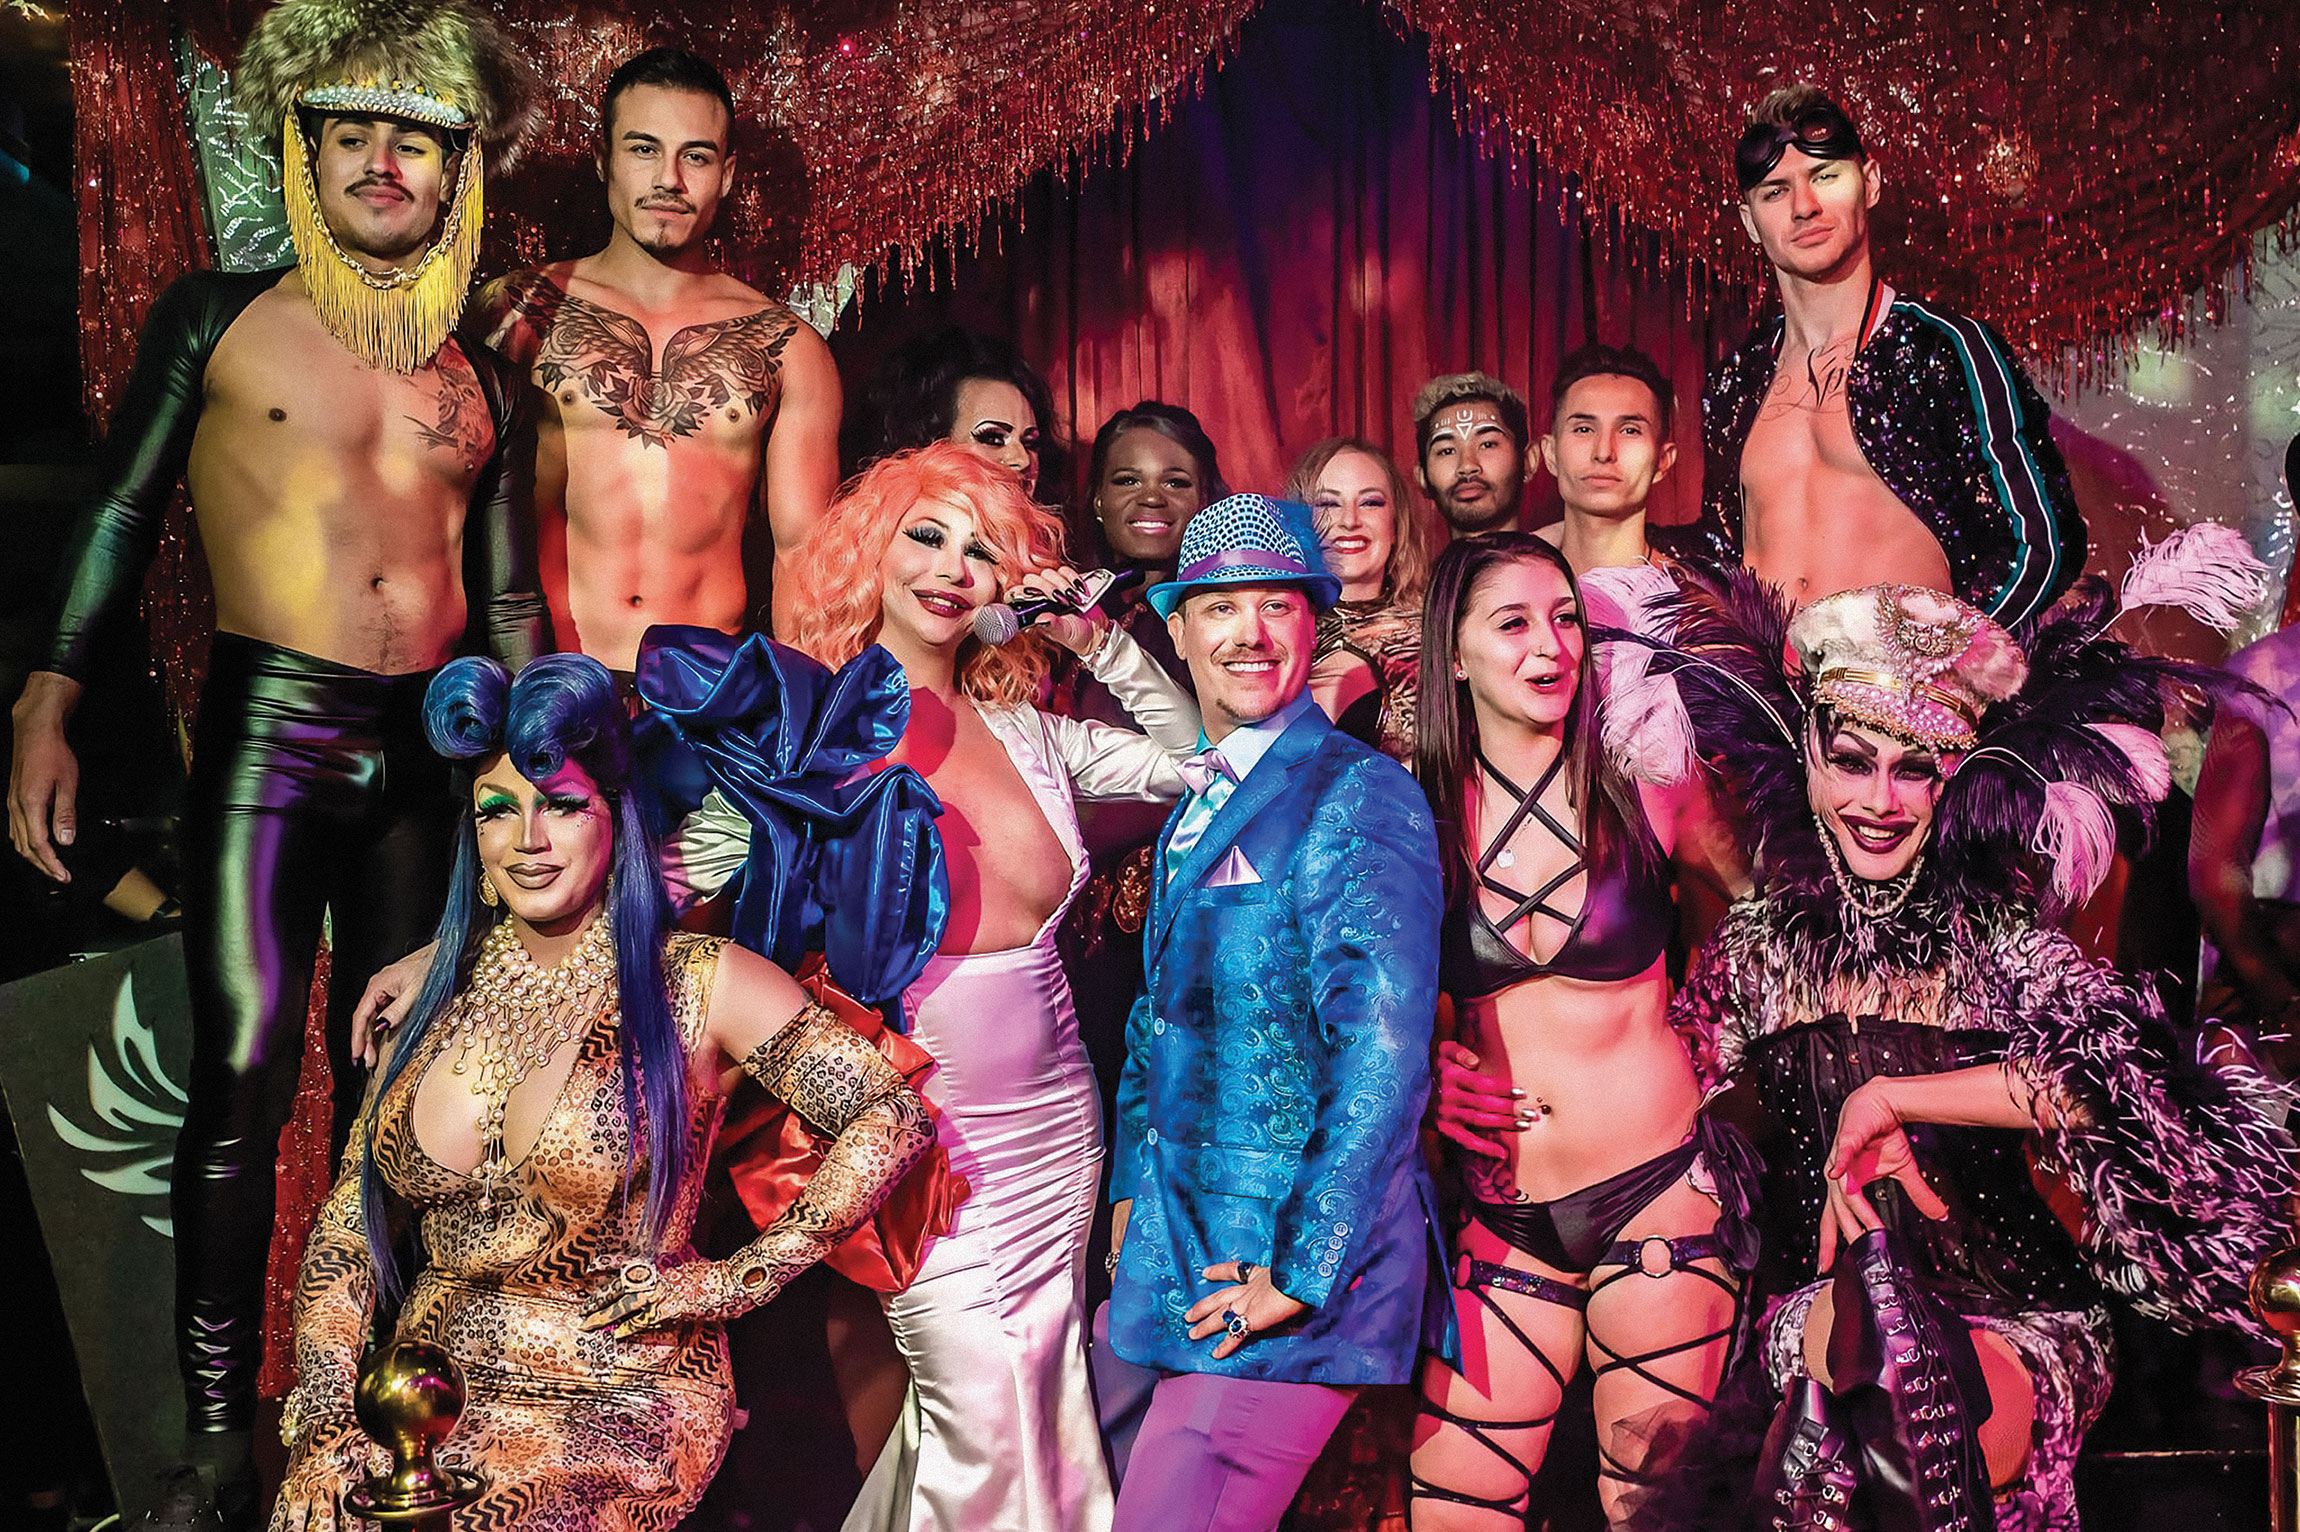 Partying with Pride: Three Las Vegas LGBT bars steeping the nightlife scene  in character and connection - Las Vegas Weekly